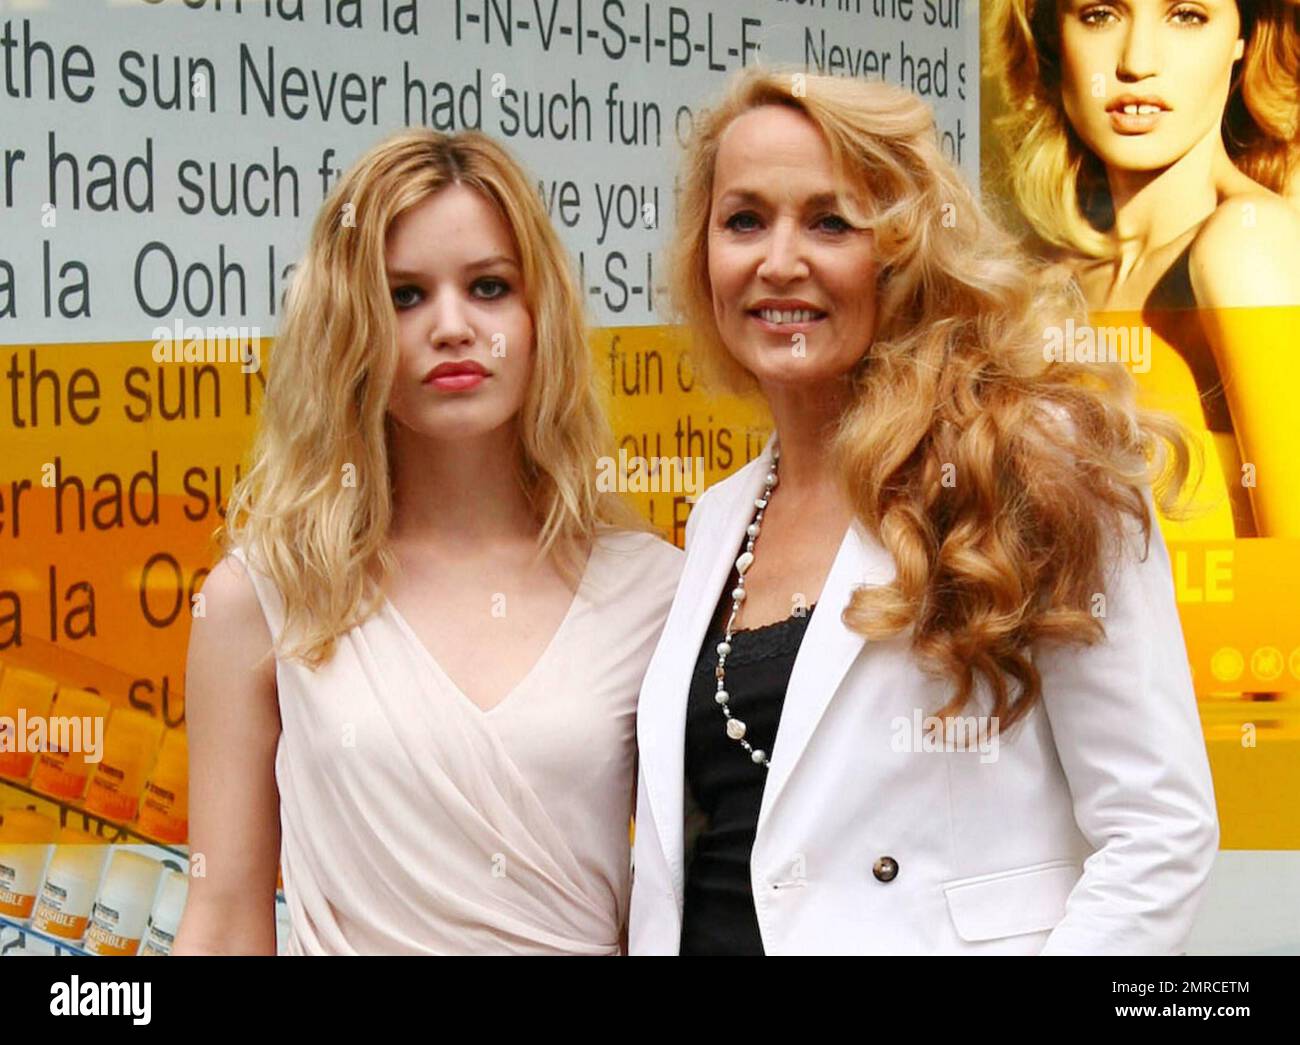 Jerry Hall, 53, American model and former long-time girlfriend to The Rolling Stones frontman Mick Jagger, and their third child Georgia May Jagger, 18, pose during a photo call at Selfridges department store for the launch of Invisible Zinc range of sun care and hybrid cosmetic-sunscreen products. London, UK. 05/27/10.    . Stock Photo